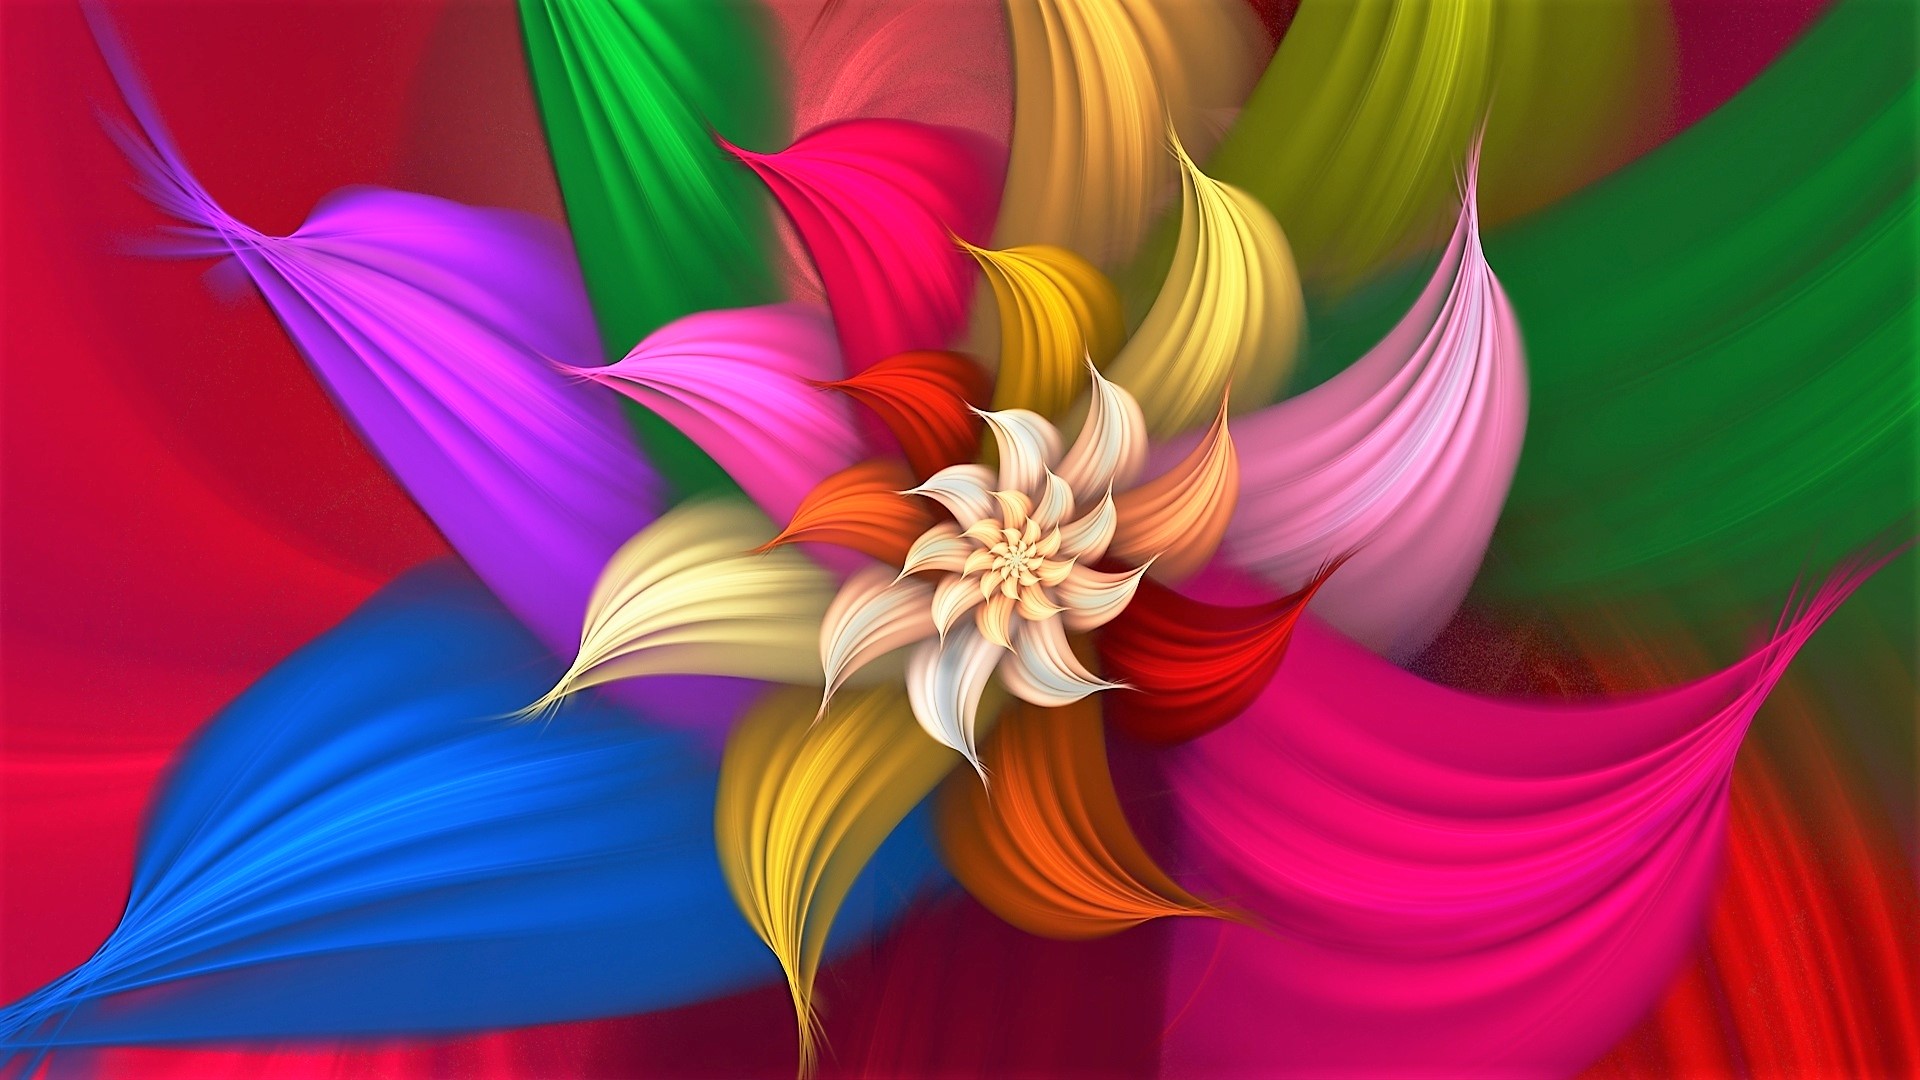 Abstract flower colorful petals light 1080x1920 iPhone 8766S Plus  wallpaper background picture image